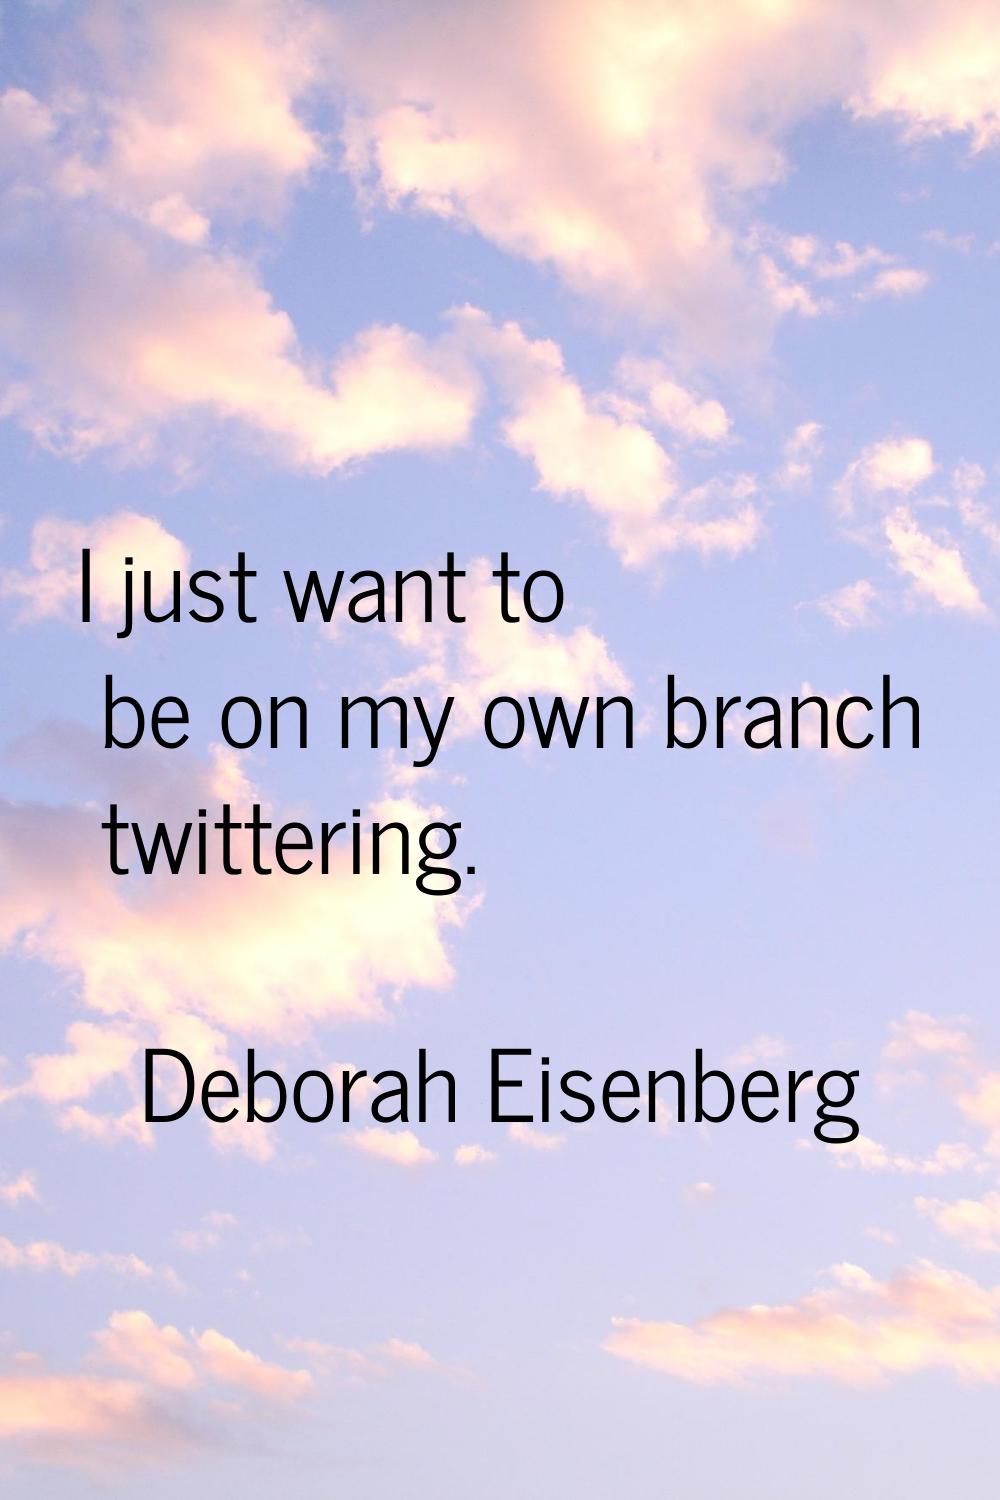 I just want to be on my own branch twittering.